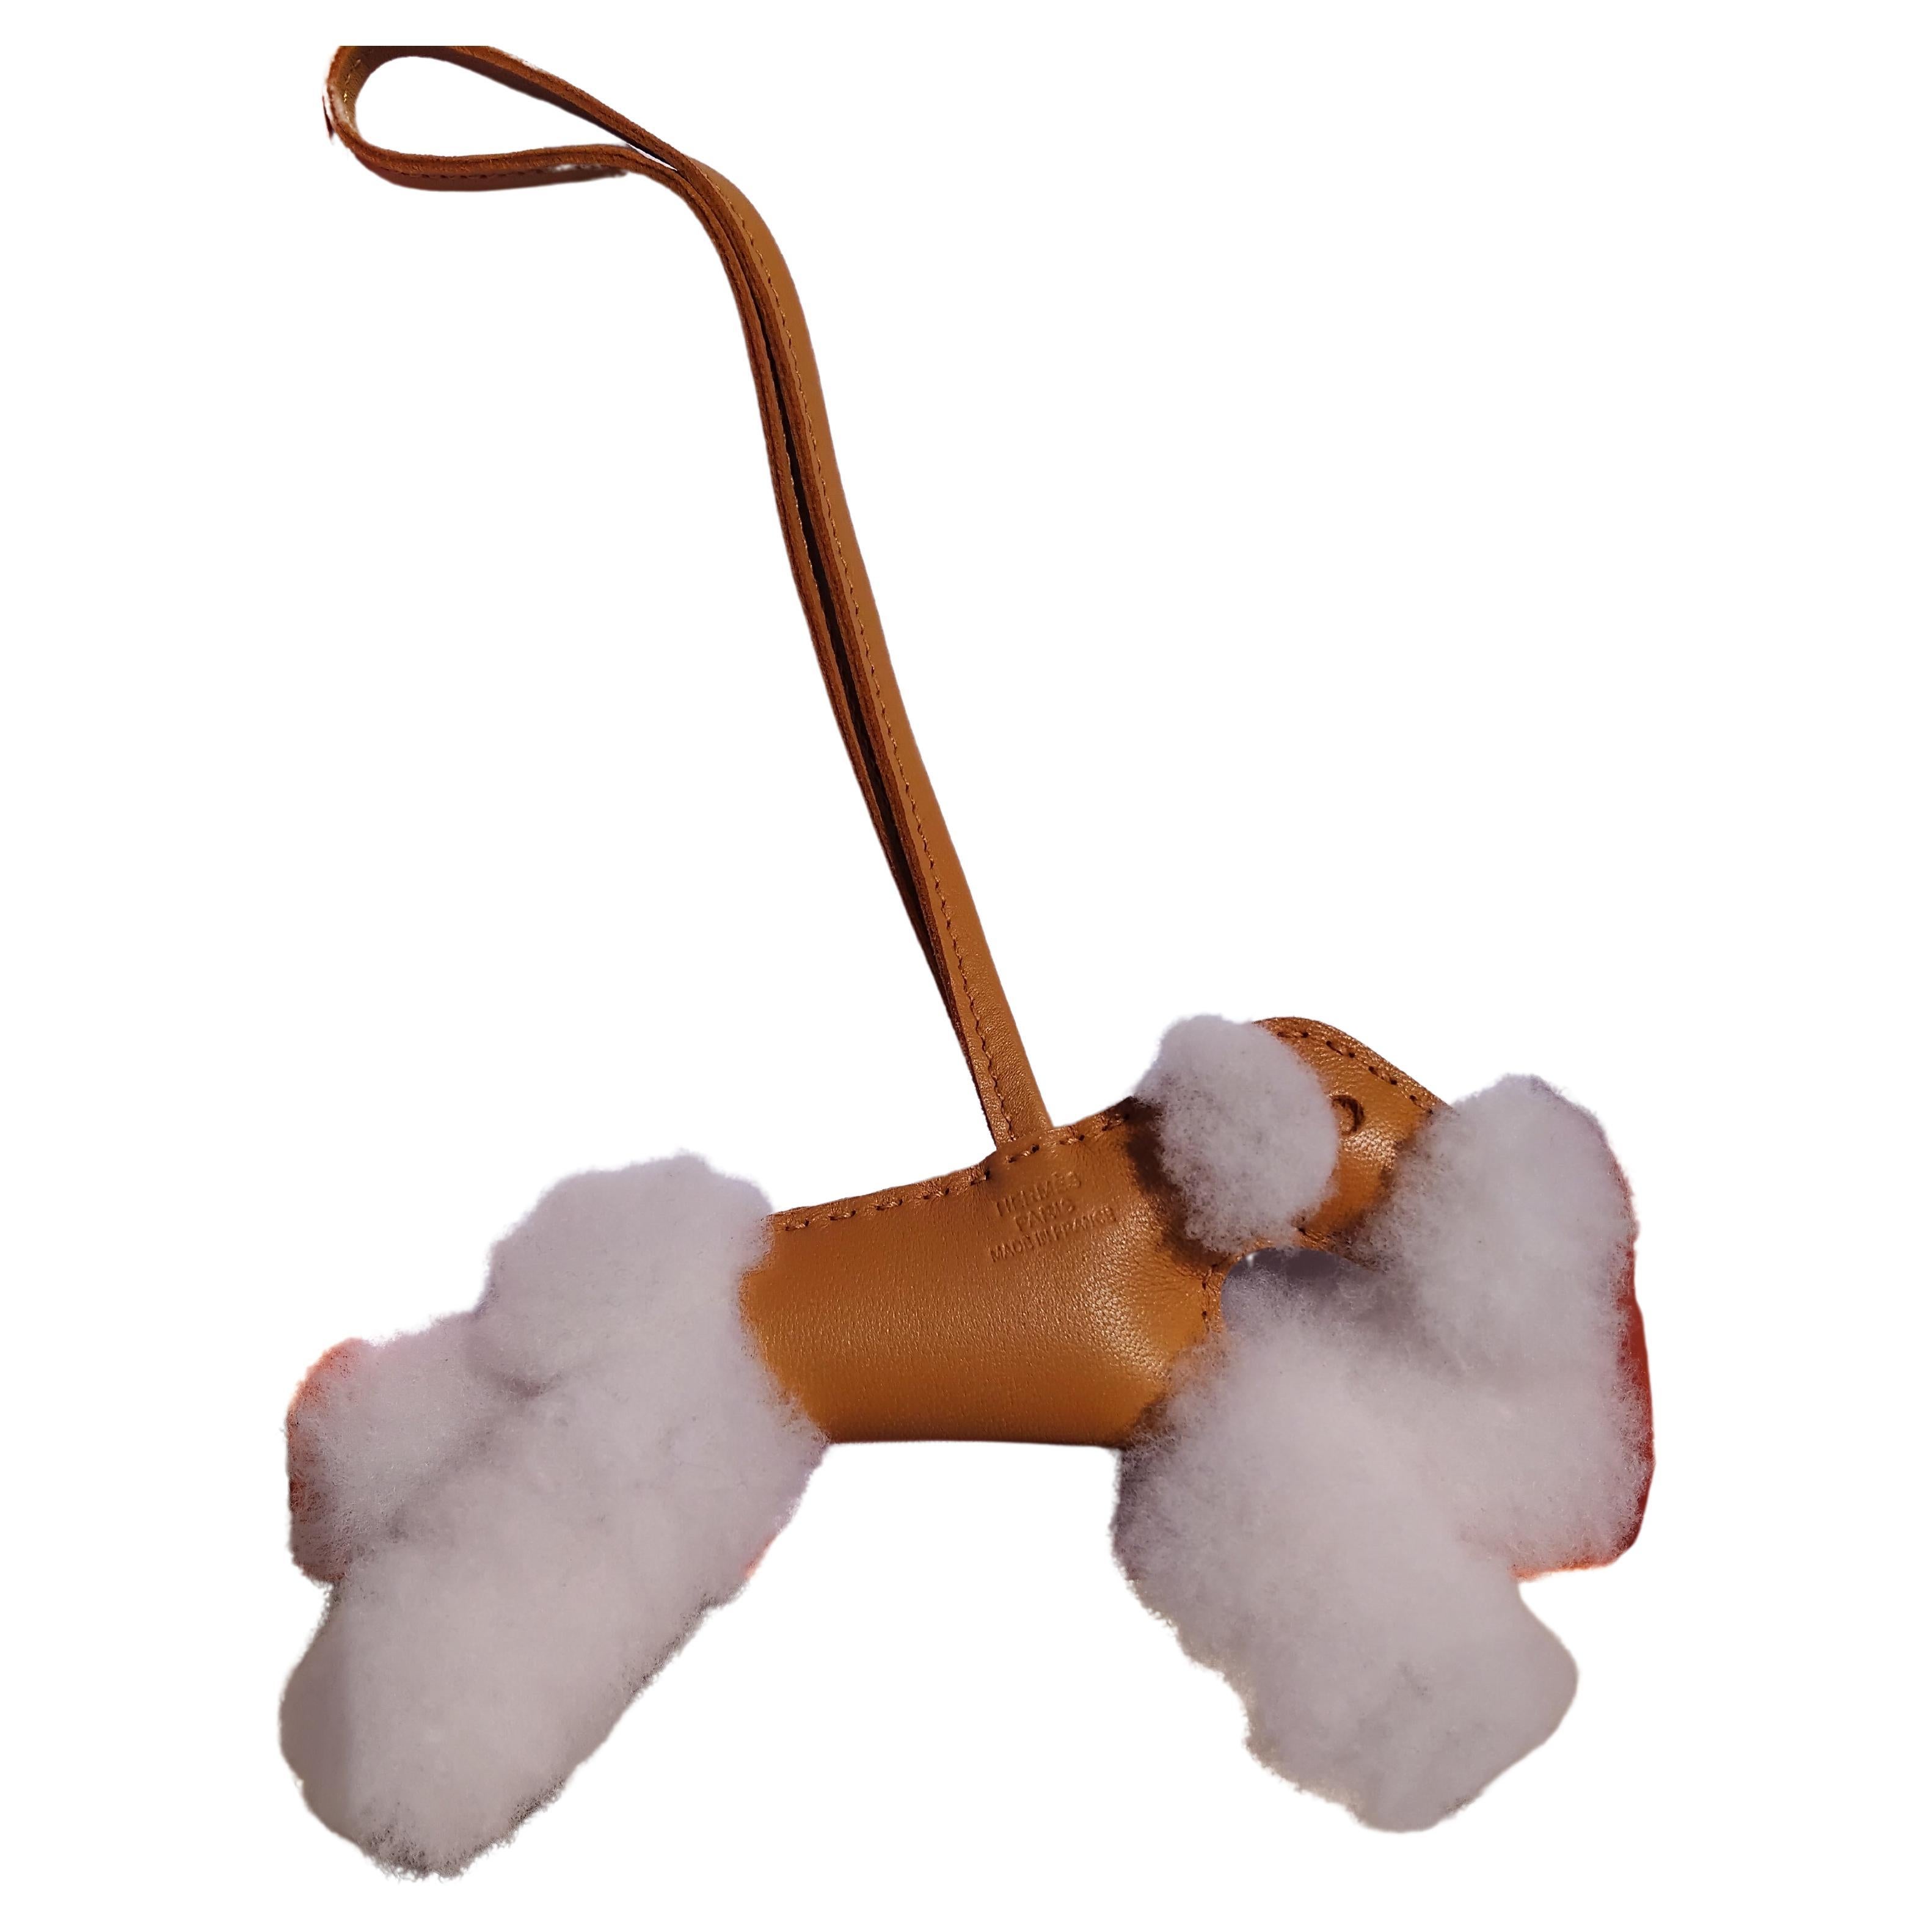 Adorable Authentic Hermès Bag Charm

In shape of a Fox Terrier dog

Made of Merinos Wool and Milo lambskin Leather 

Colorway: Sesame

Stamp U for 2022

